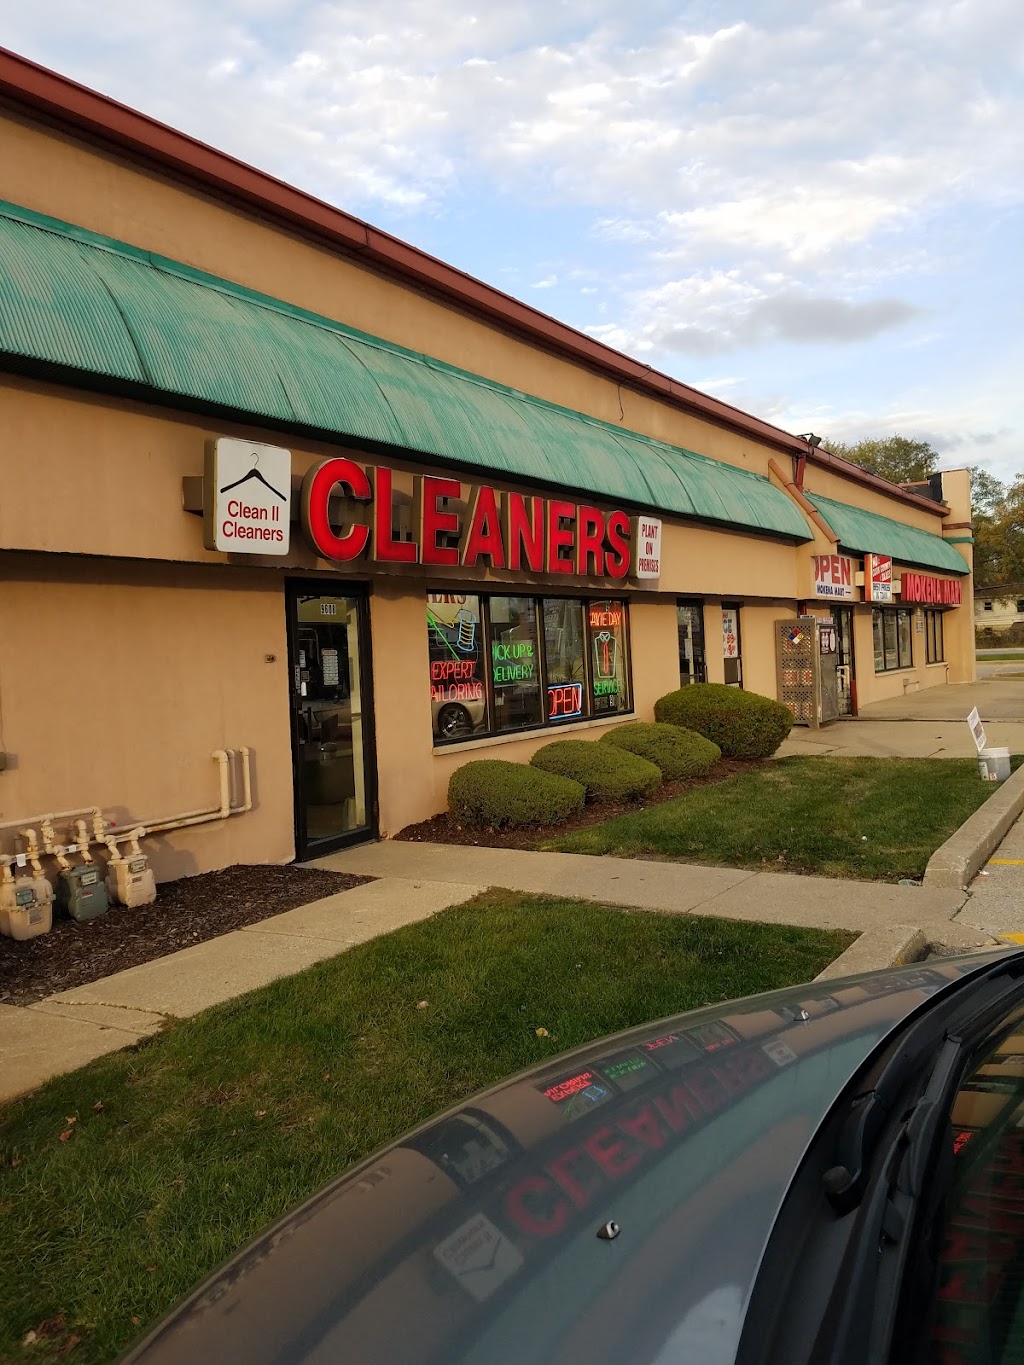 Clean 2 Cleaners | 9608 Willow Ln, Mokena, IL 60448 | Phone: (708) 478-8240